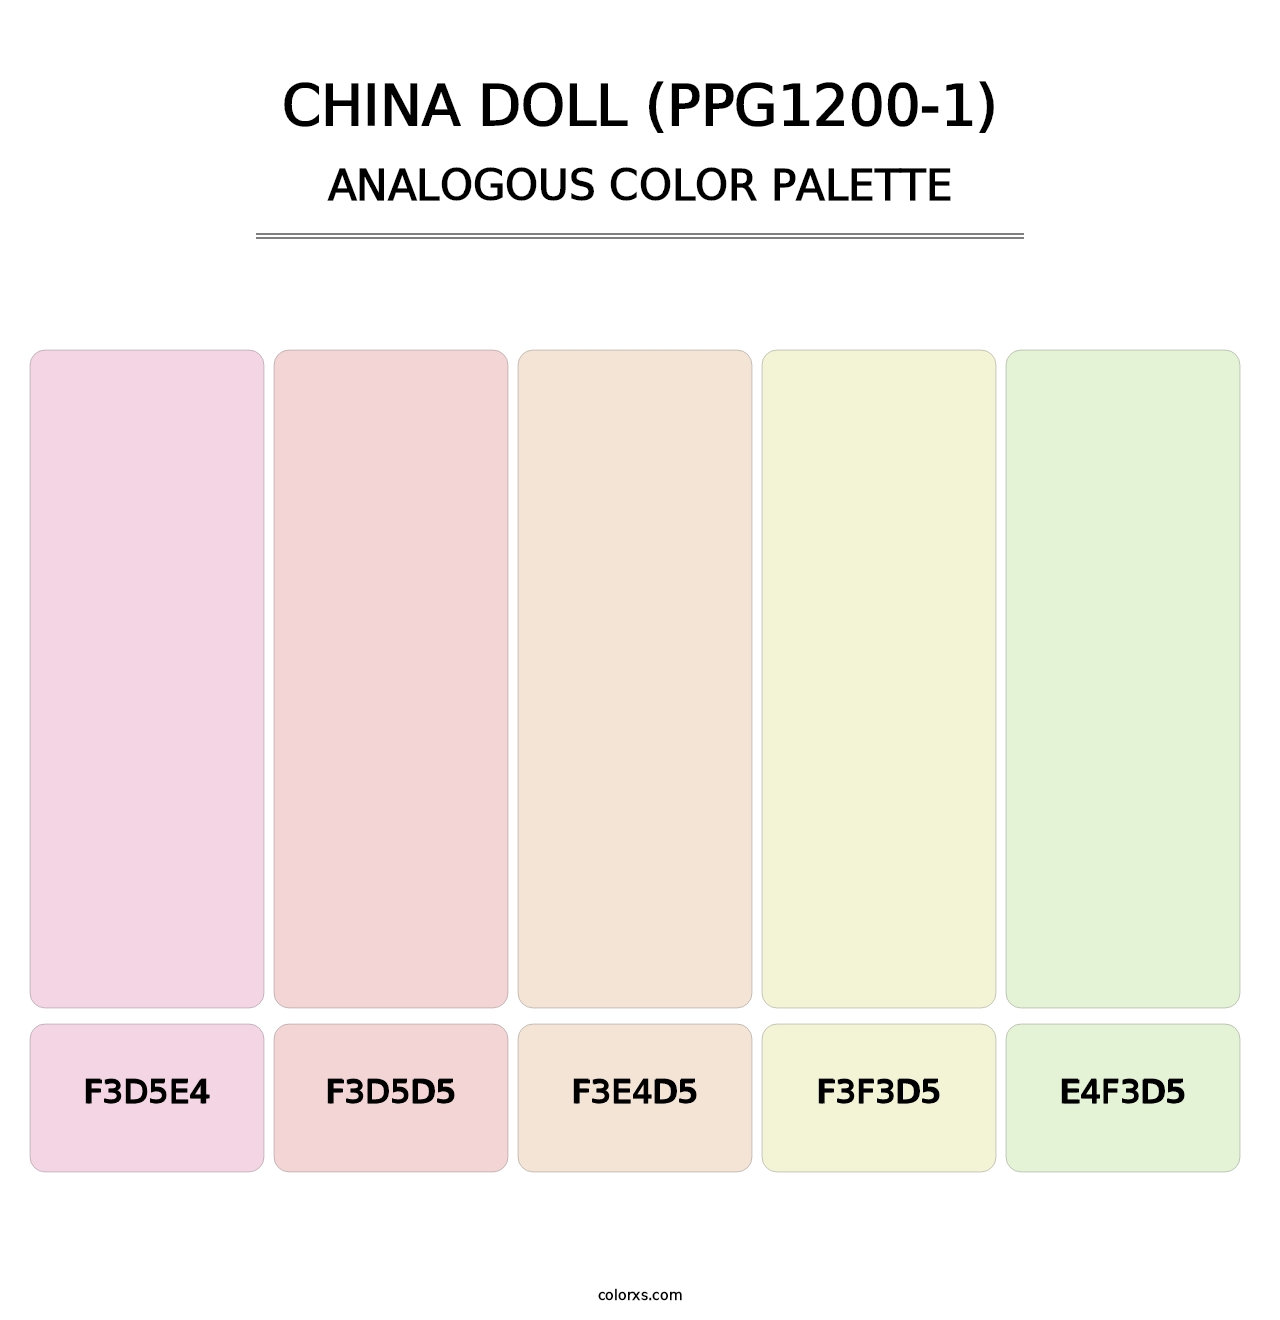 China Doll (PPG1200-1) - Analogous Color Palette